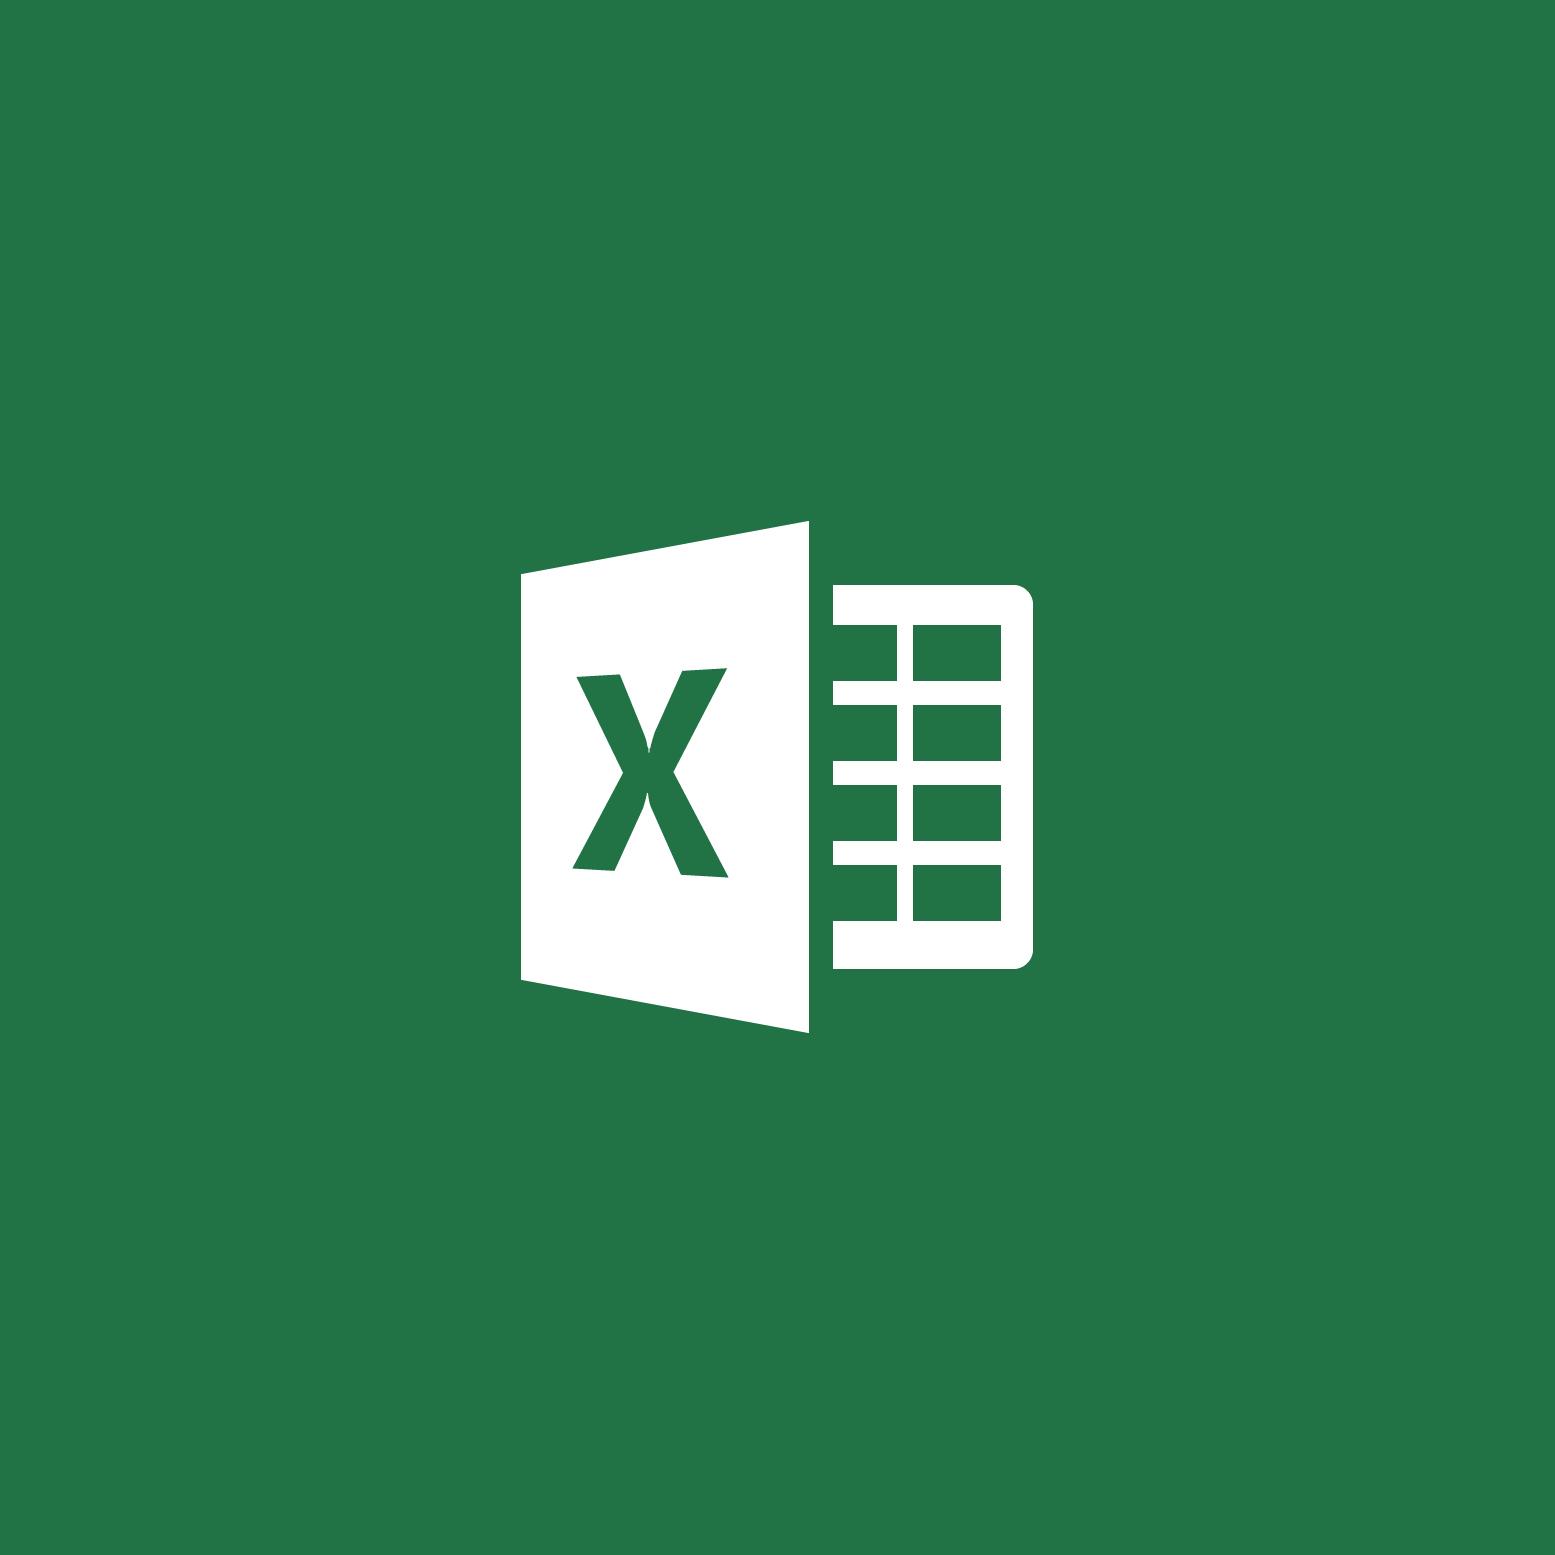 excel application for mac